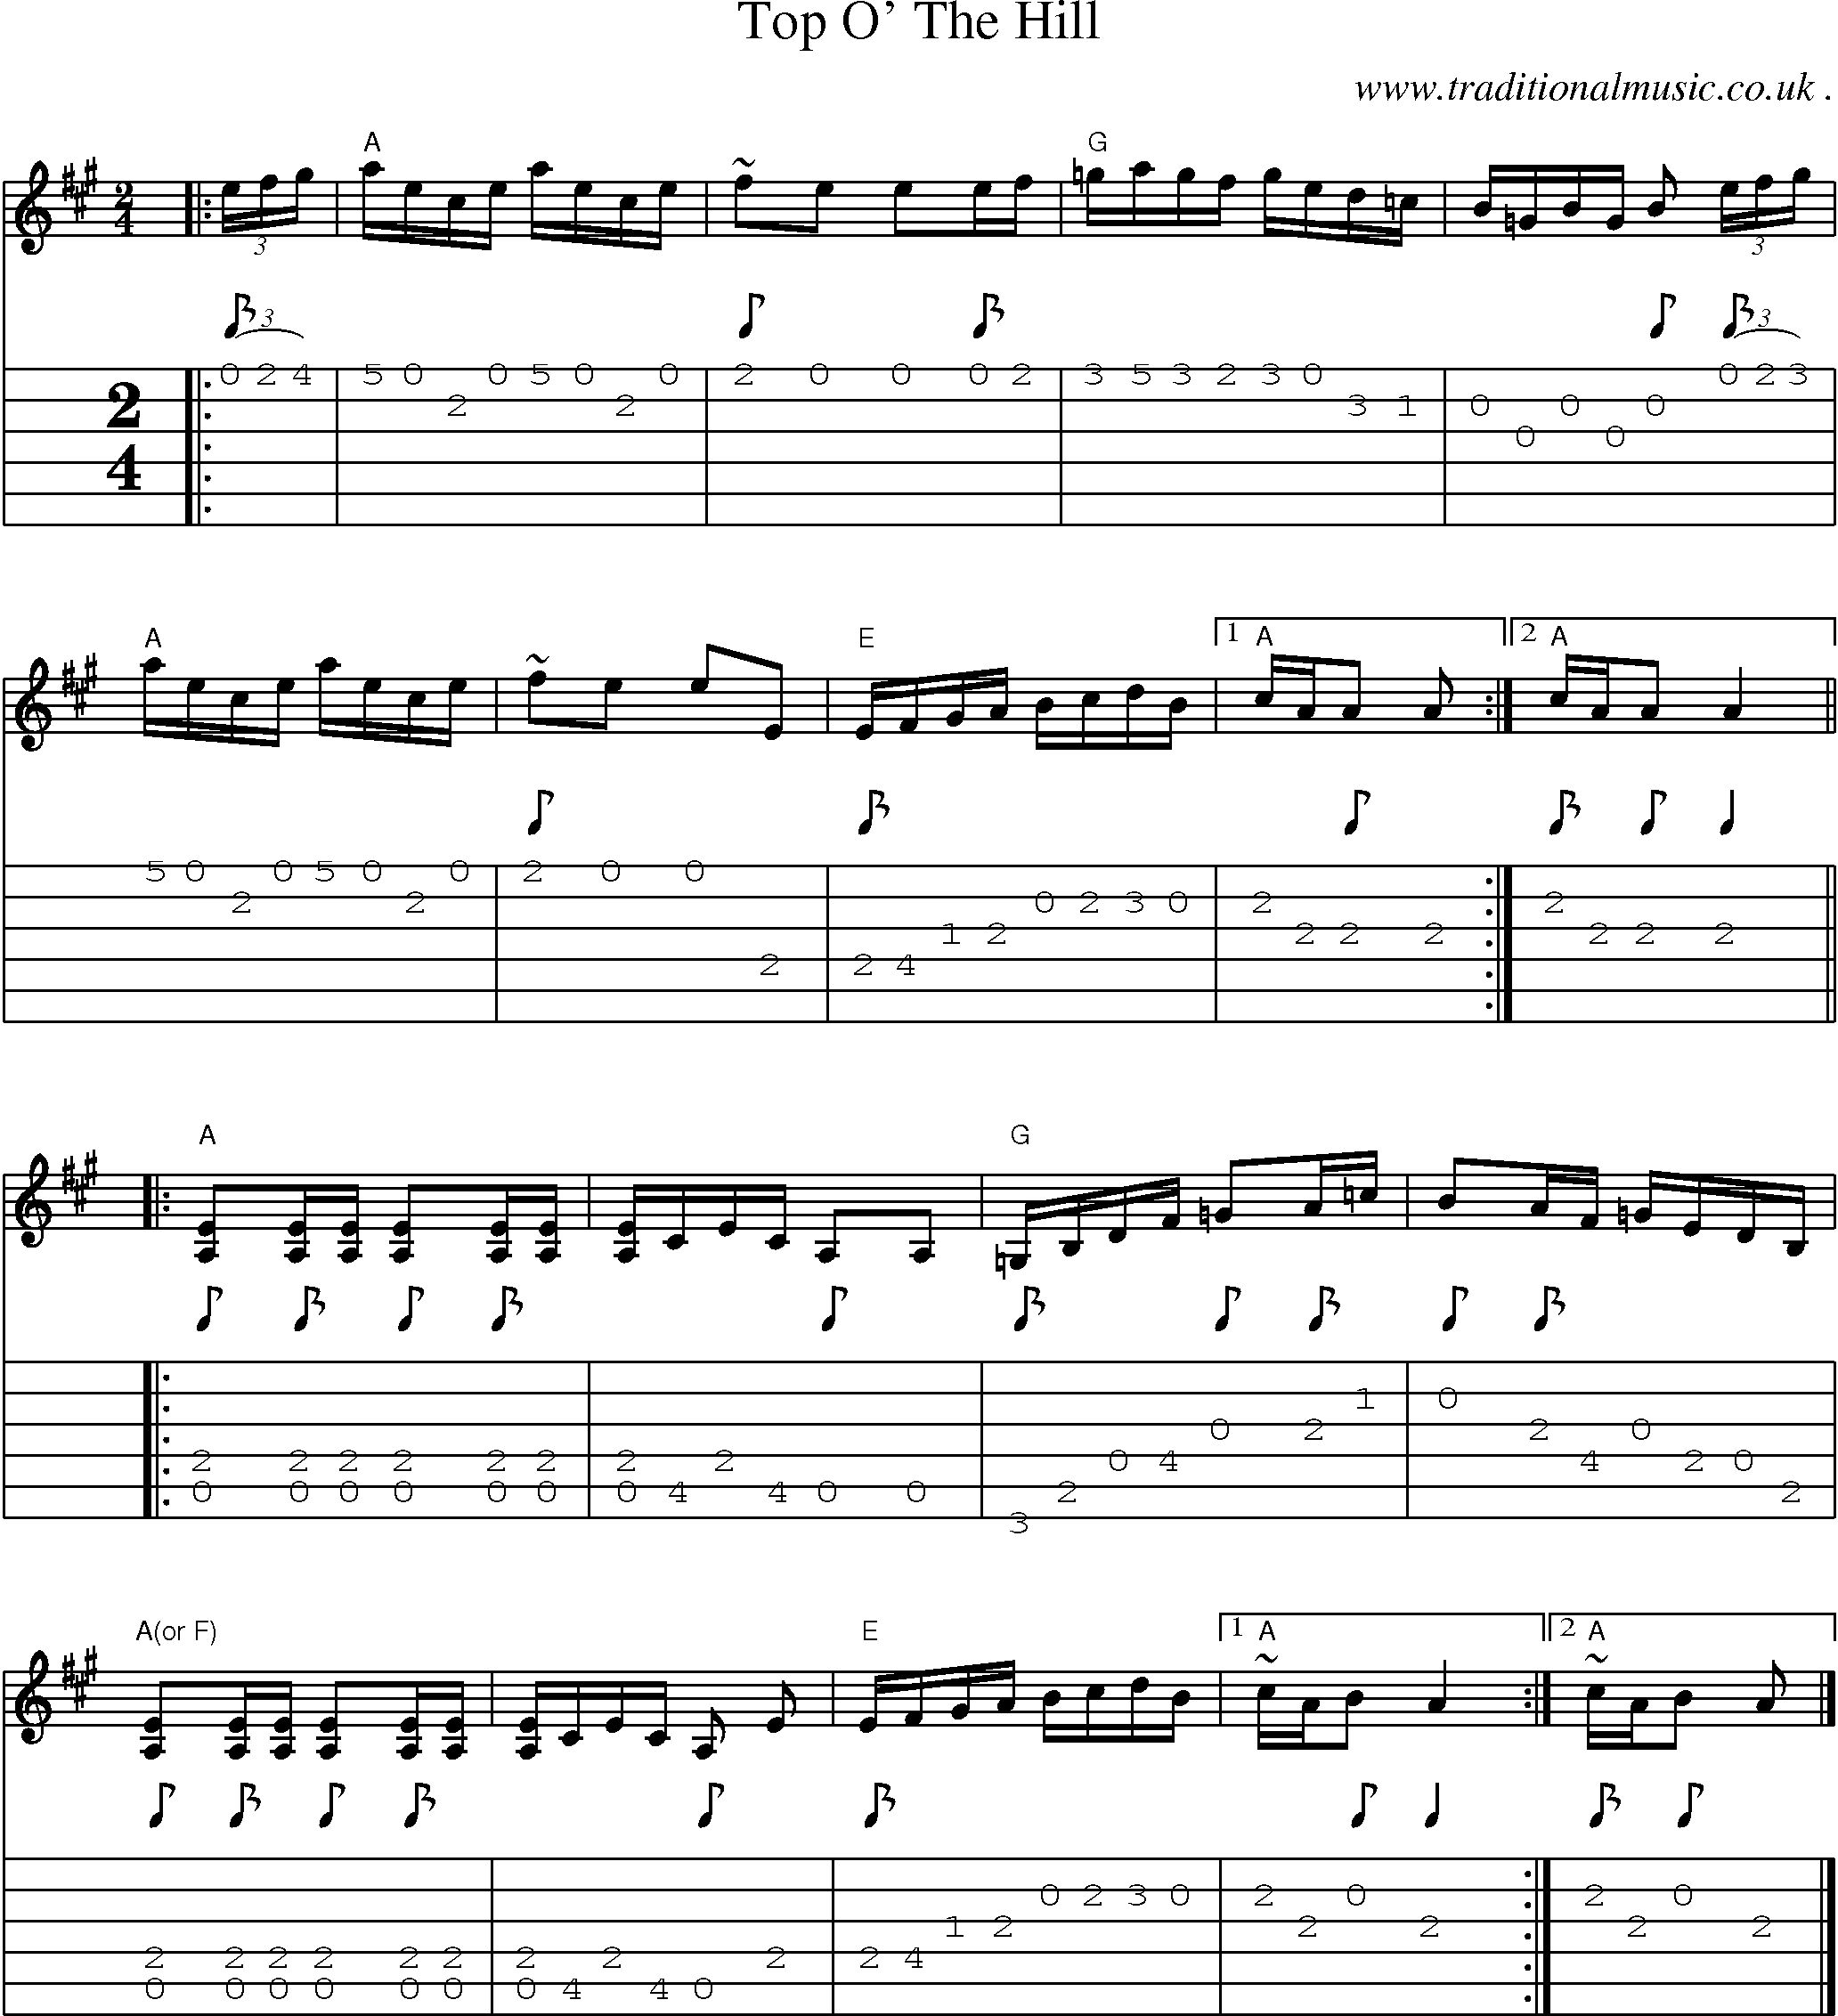 Music Score and Guitar Tabs for Top O The Hill